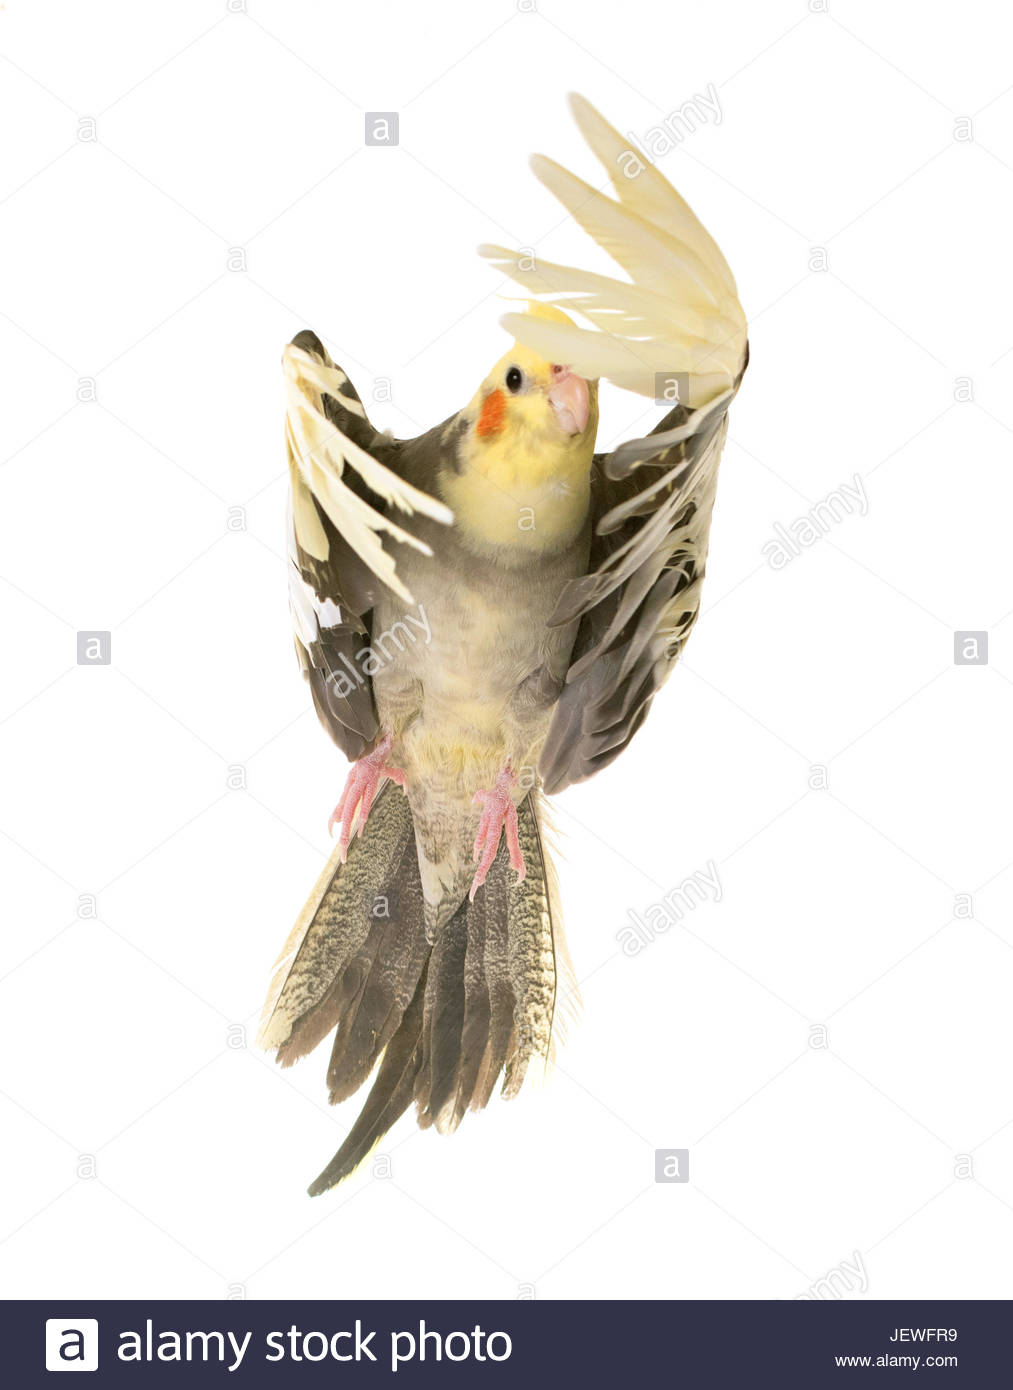 Flying Gray Cockatiel In Front Of White Background Stock Photo